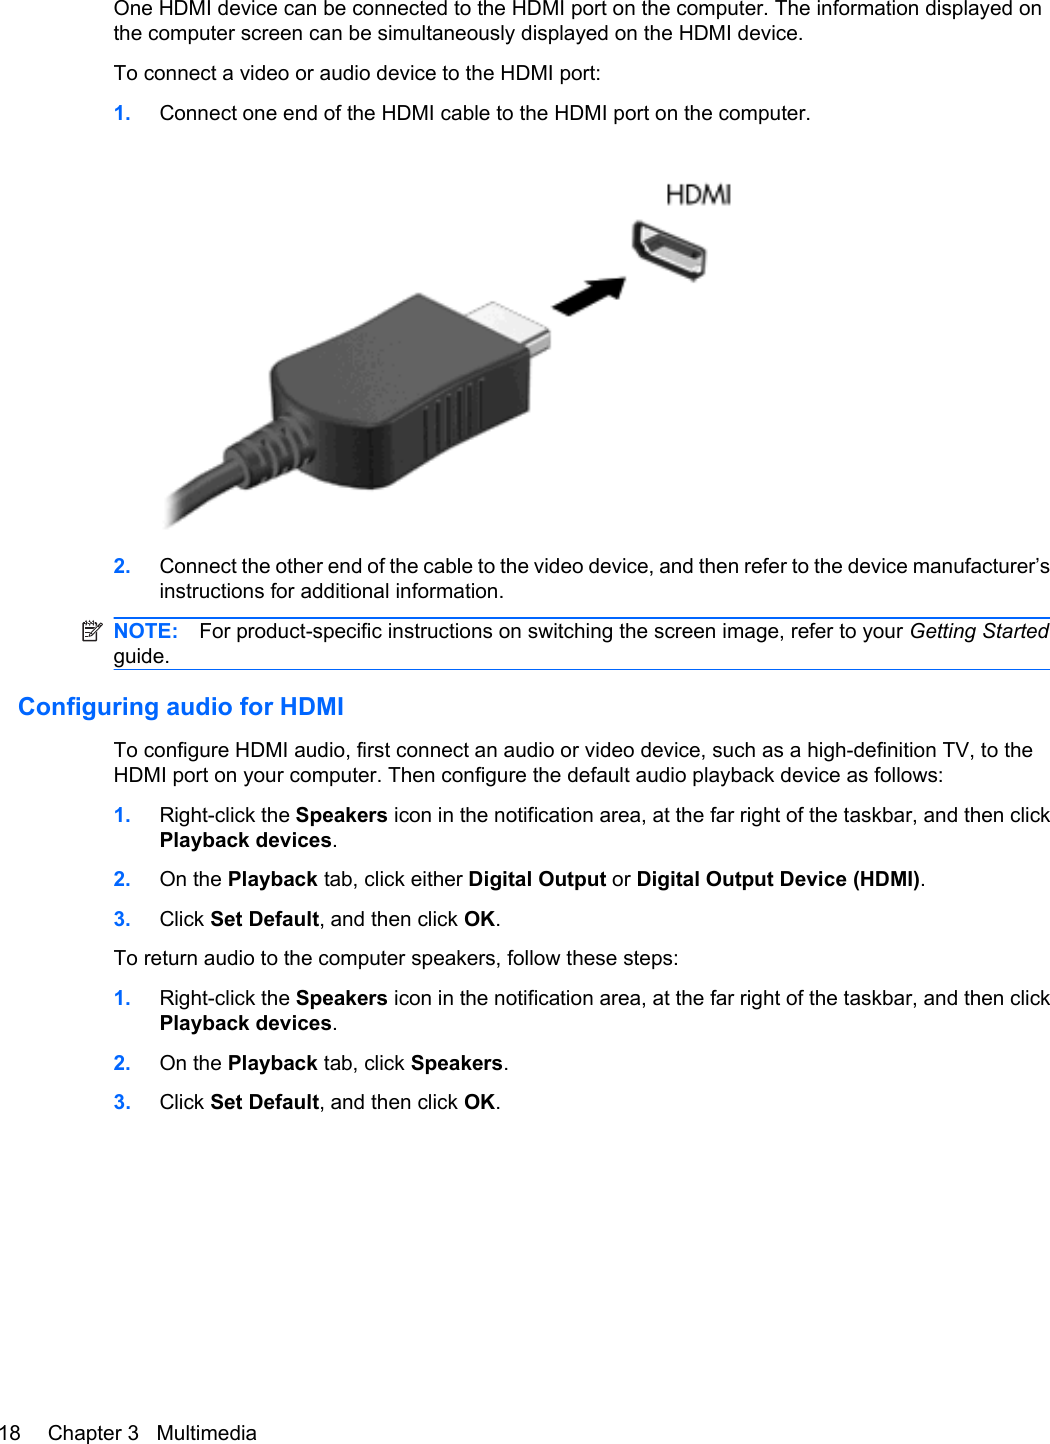 One HDMI device can be connected to the HDMI port on the computer. The information displayed onthe computer screen can be simultaneously displayed on the HDMI device.To connect a video or audio device to the HDMI port:1. Connect one end of the HDMI cable to the HDMI port on the computer.2. Connect the other end of the cable to the video device, and then refer to the device manufacturer’sinstructions for additional information.NOTE: For product-specific instructions on switching the screen image, refer to your Getting Startedguide.Configuring audio for HDMITo configure HDMI audio, first connect an audio or video device, such as a high-definition TV, to theHDMI port on your computer. Then configure the default audio playback device as follows:1. Right-click the Speakers icon in the notification area, at the far right of the taskbar, and then clickPlayback devices.2. On the Playback tab, click either Digital Output or Digital Output Device (HDMI).3. Click Set Default, and then click OK.To return audio to the computer speakers, follow these steps:1. Right-click the Speakers icon in the notification area, at the far right of the taskbar, and then clickPlayback devices.2. On the Playback tab, click Speakers.3. Click Set Default, and then click OK.18 Chapter 3   Multimedia